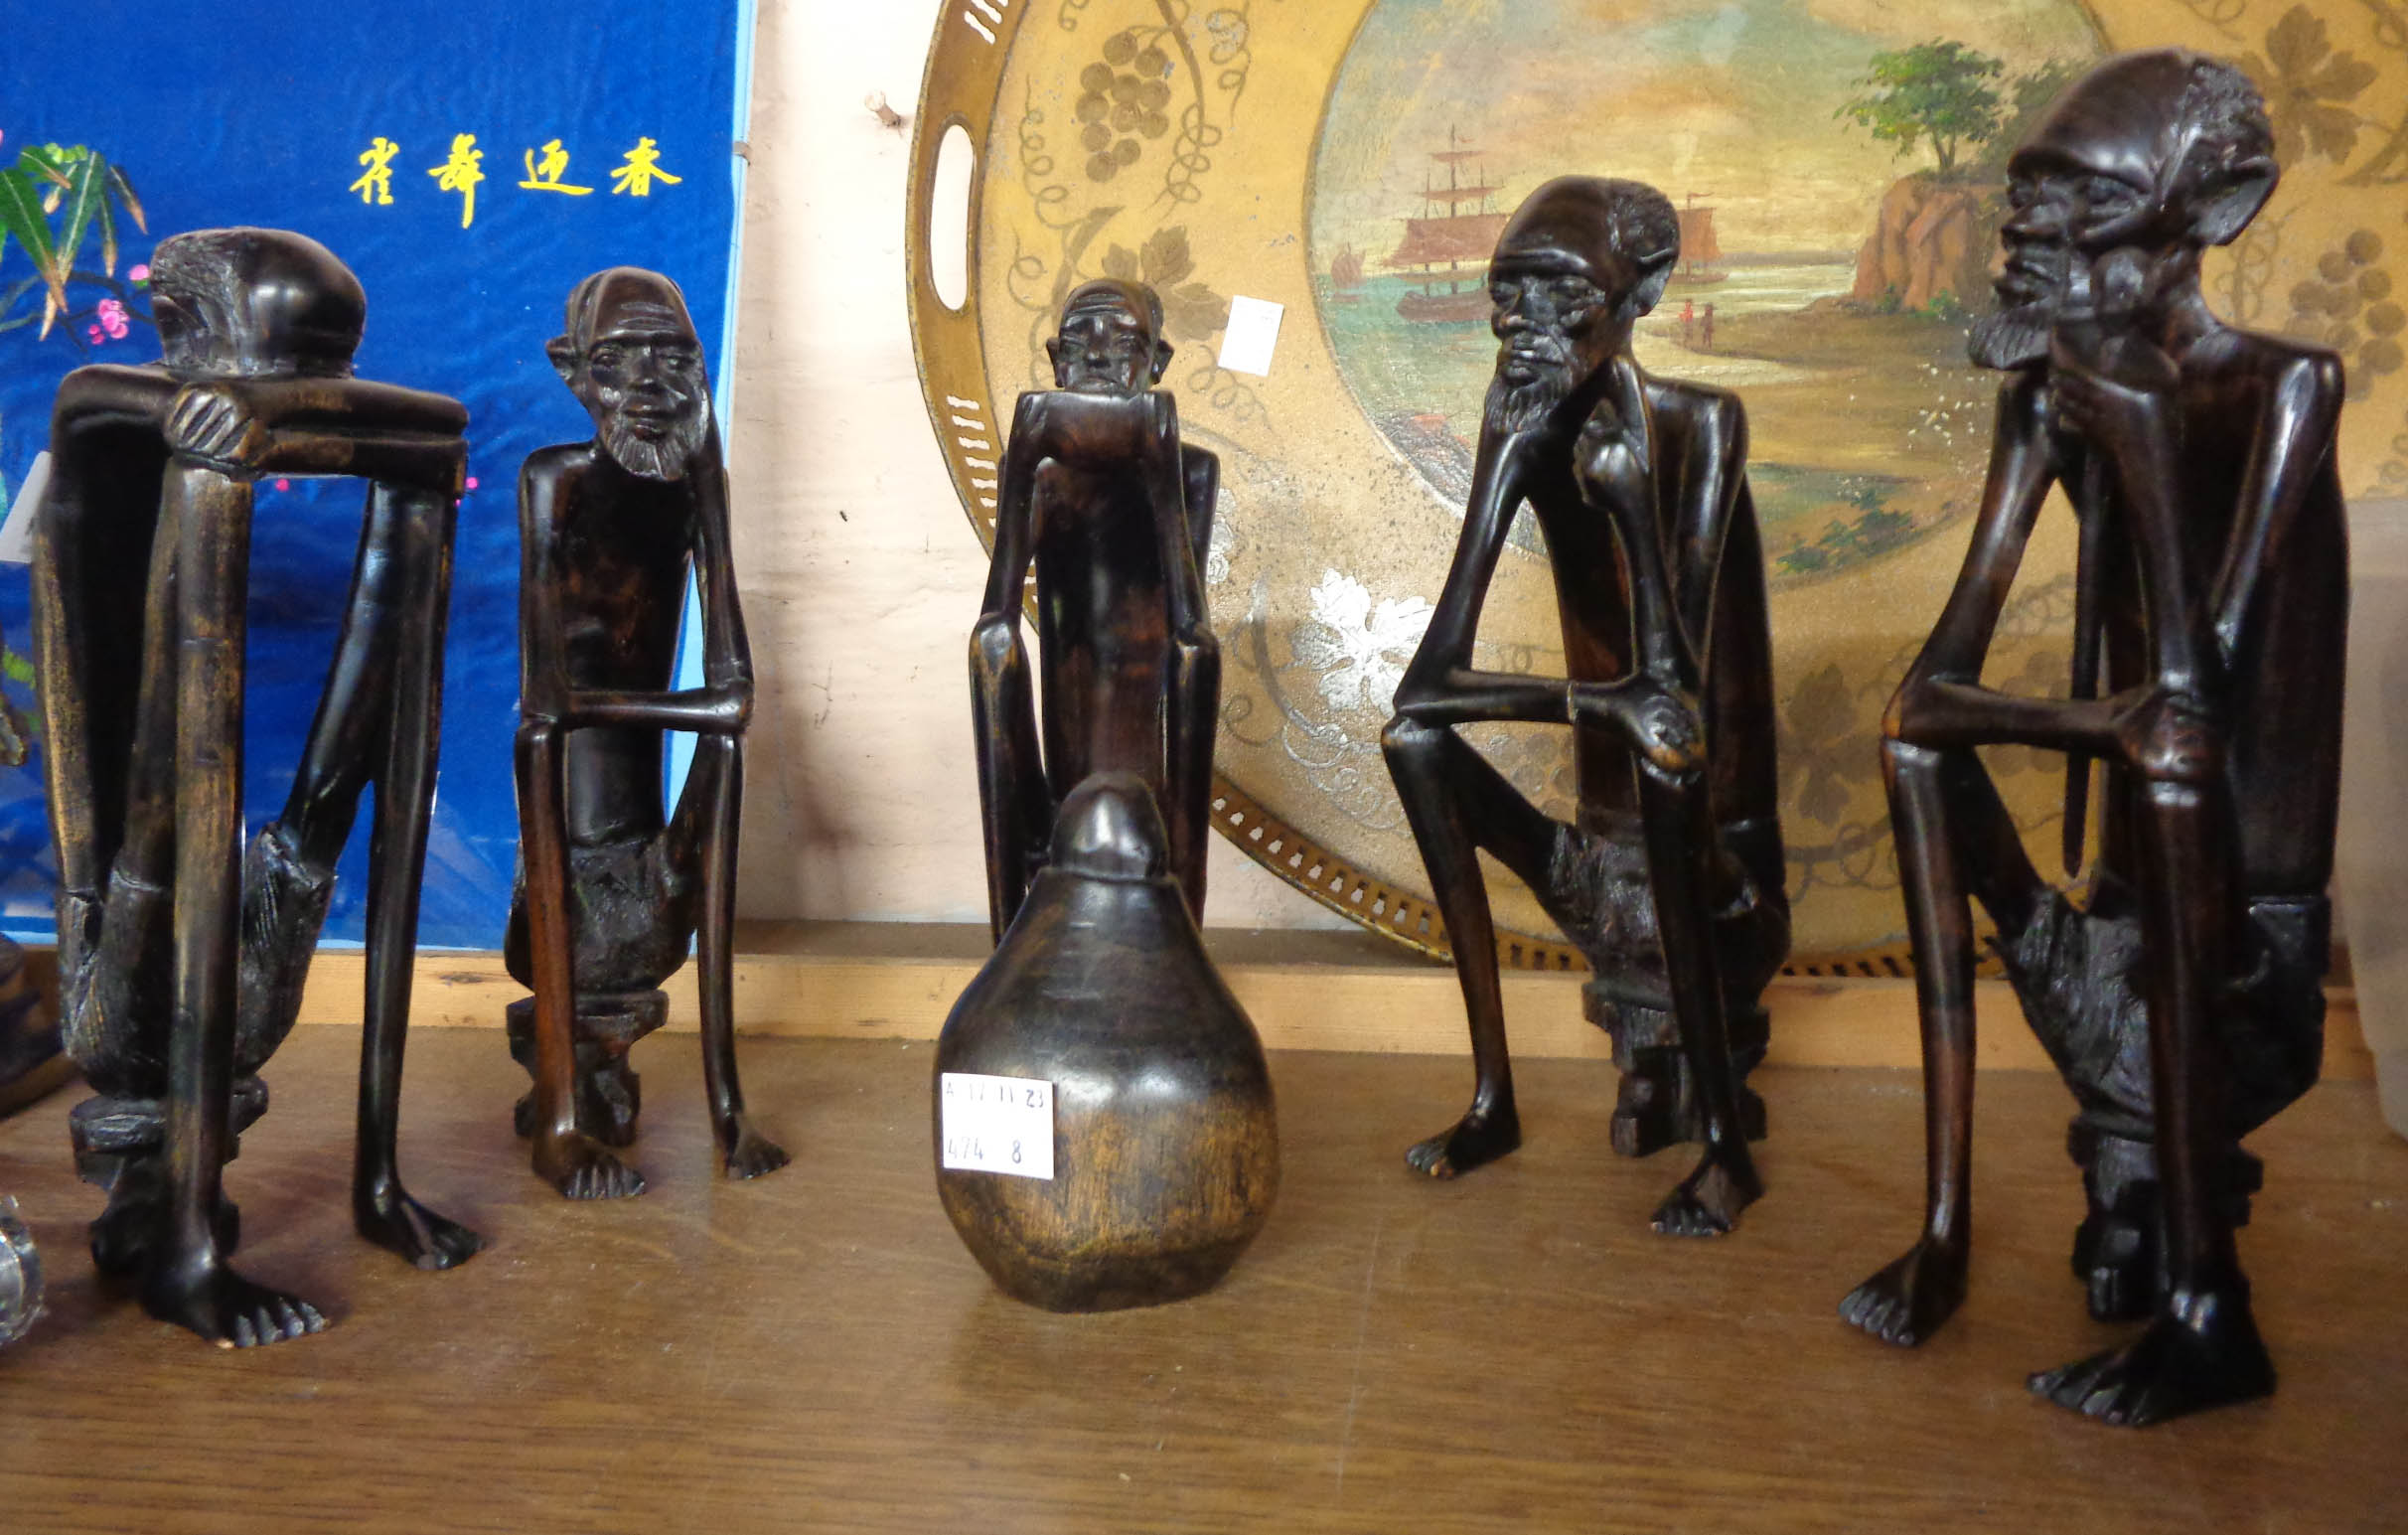 A group of five African carved ebony seated figures with central gourd style pot - some arm cracks